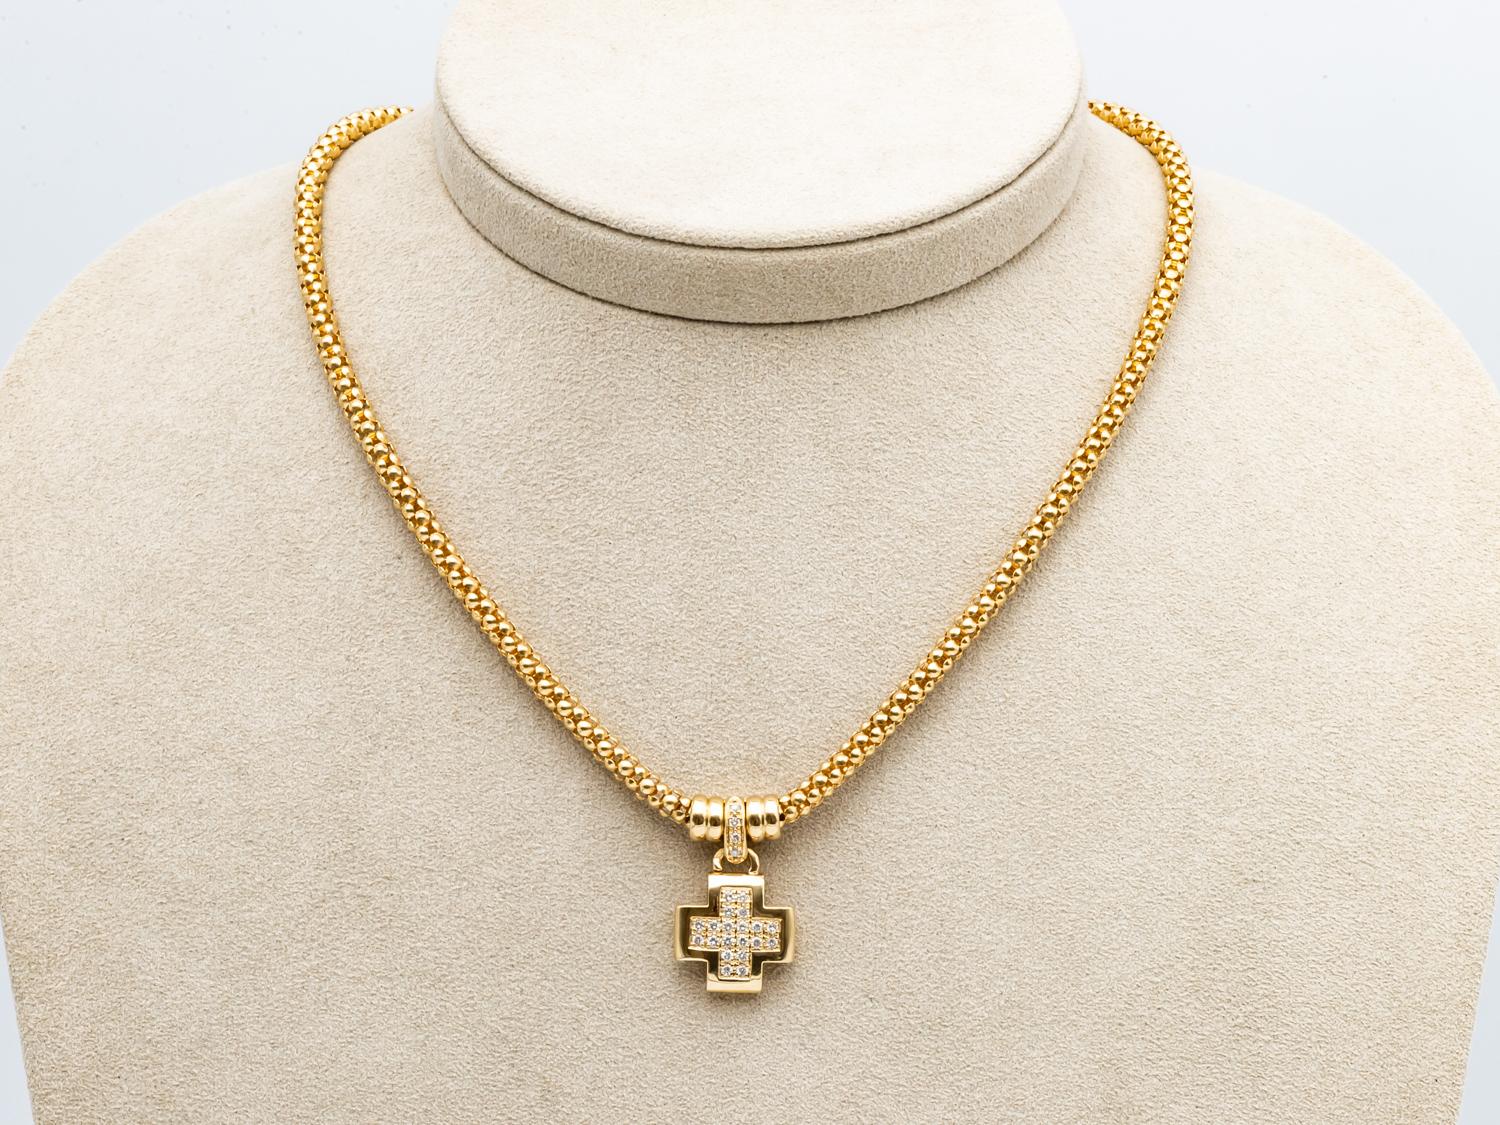 Women's or Men's Yellow Gold 18 Karat Necklace with a Cross Pendant Articulated Diamond Paving